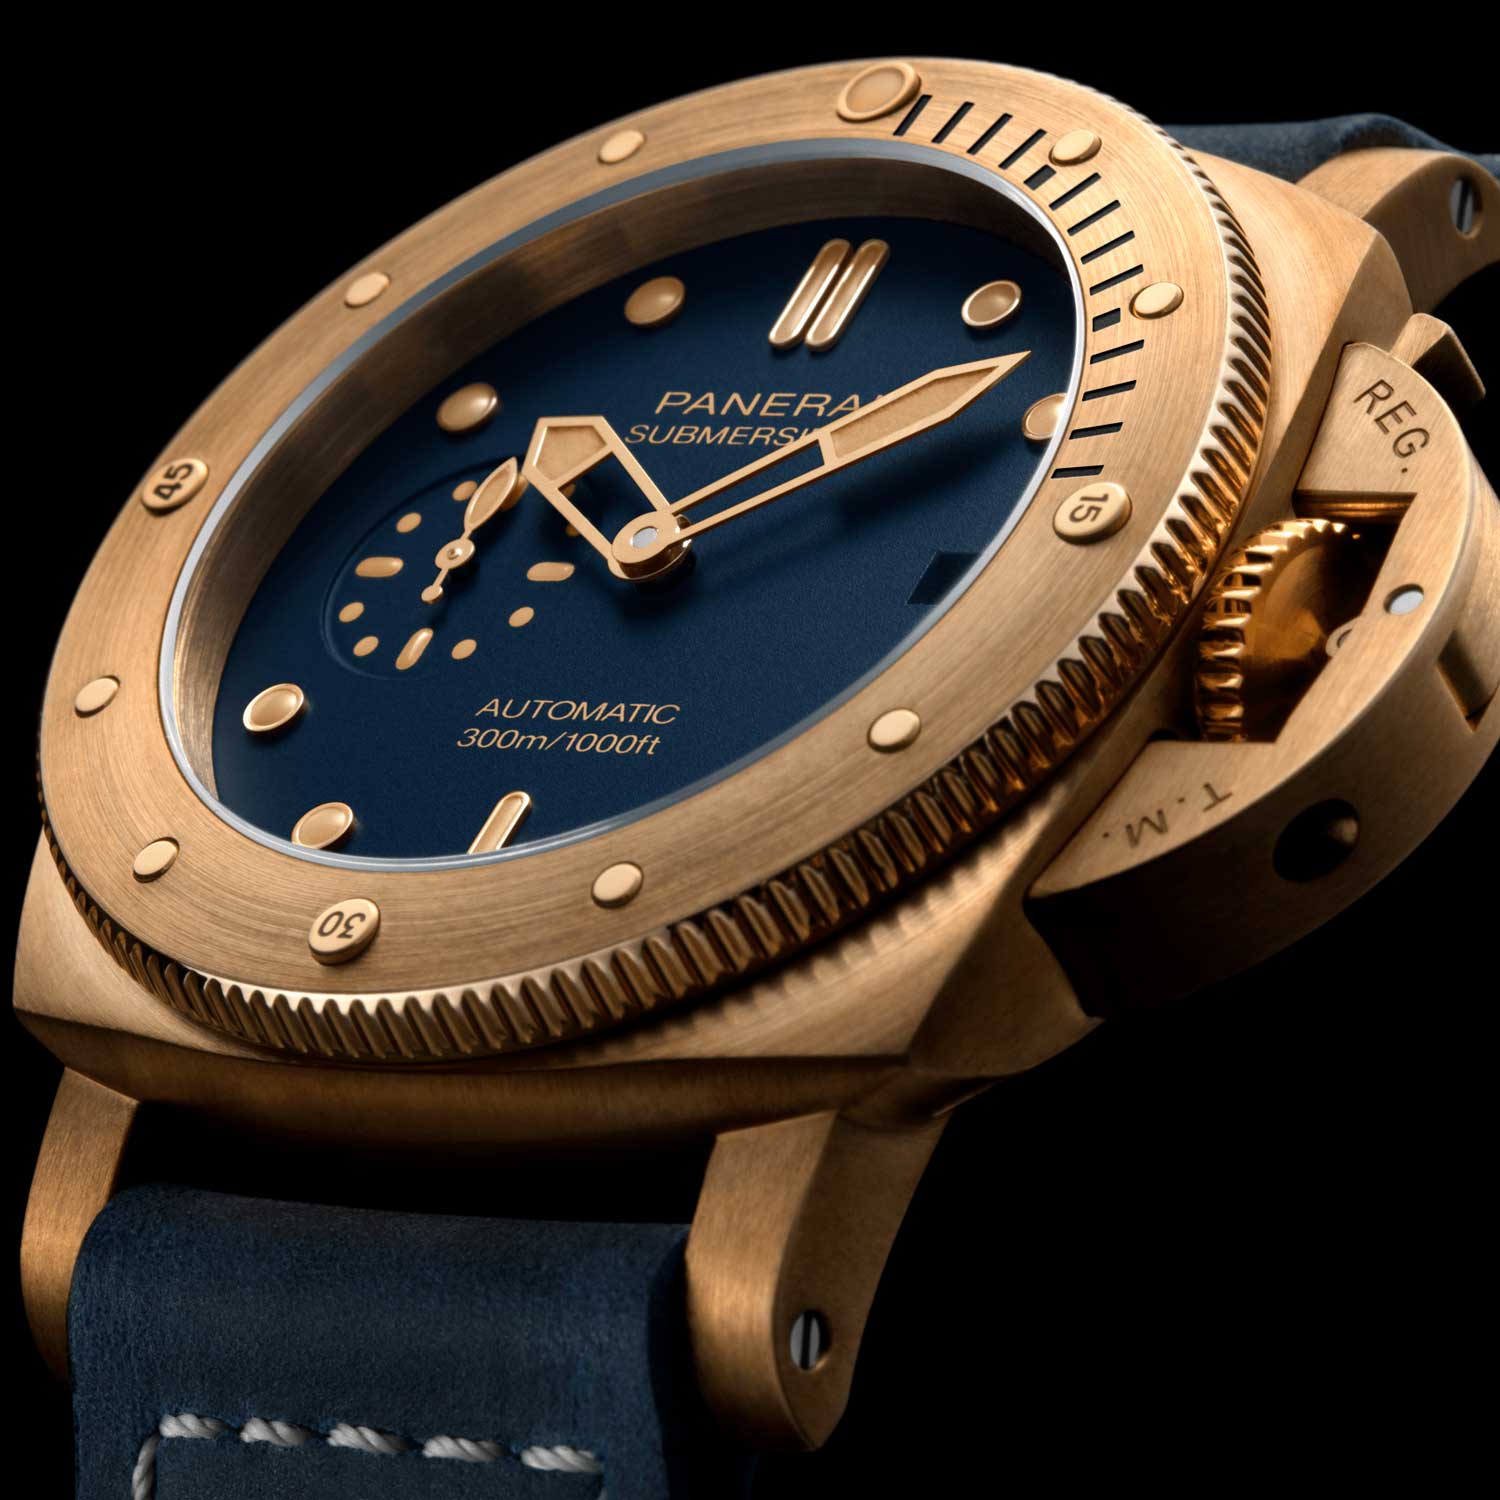 The Bronzo Blu Abisso is powered by self-winding mechanical calibre P.900 with promises a power reserve of three days